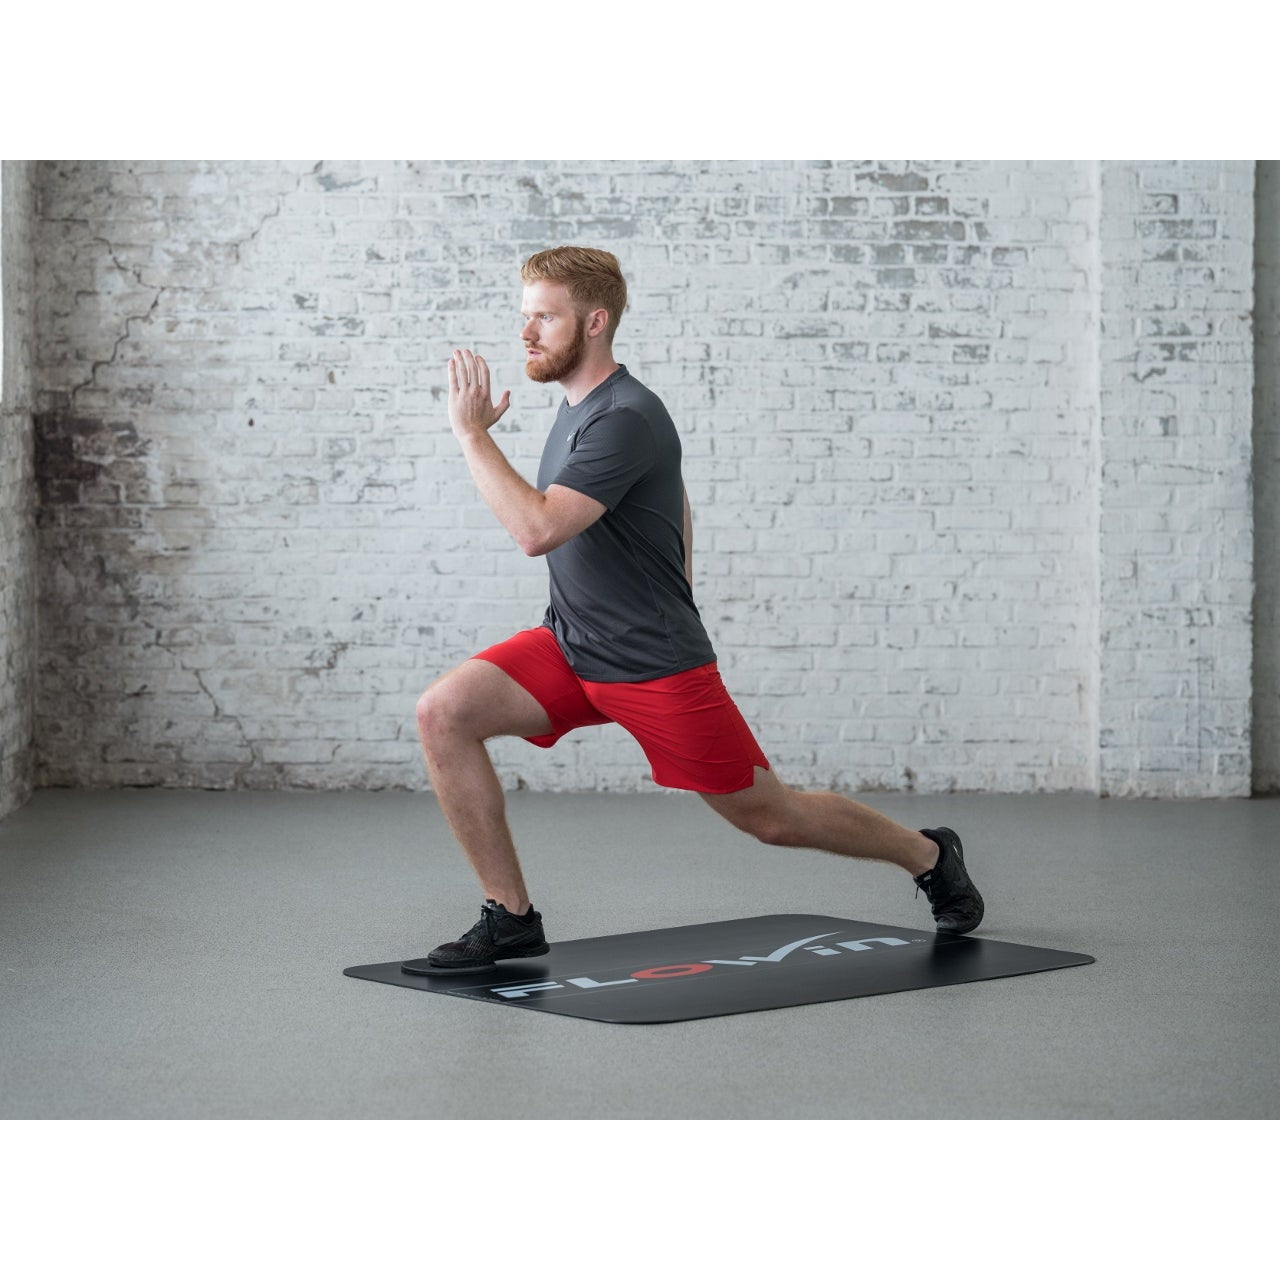 Fitness Board for Friction Training - Flowin® Pro